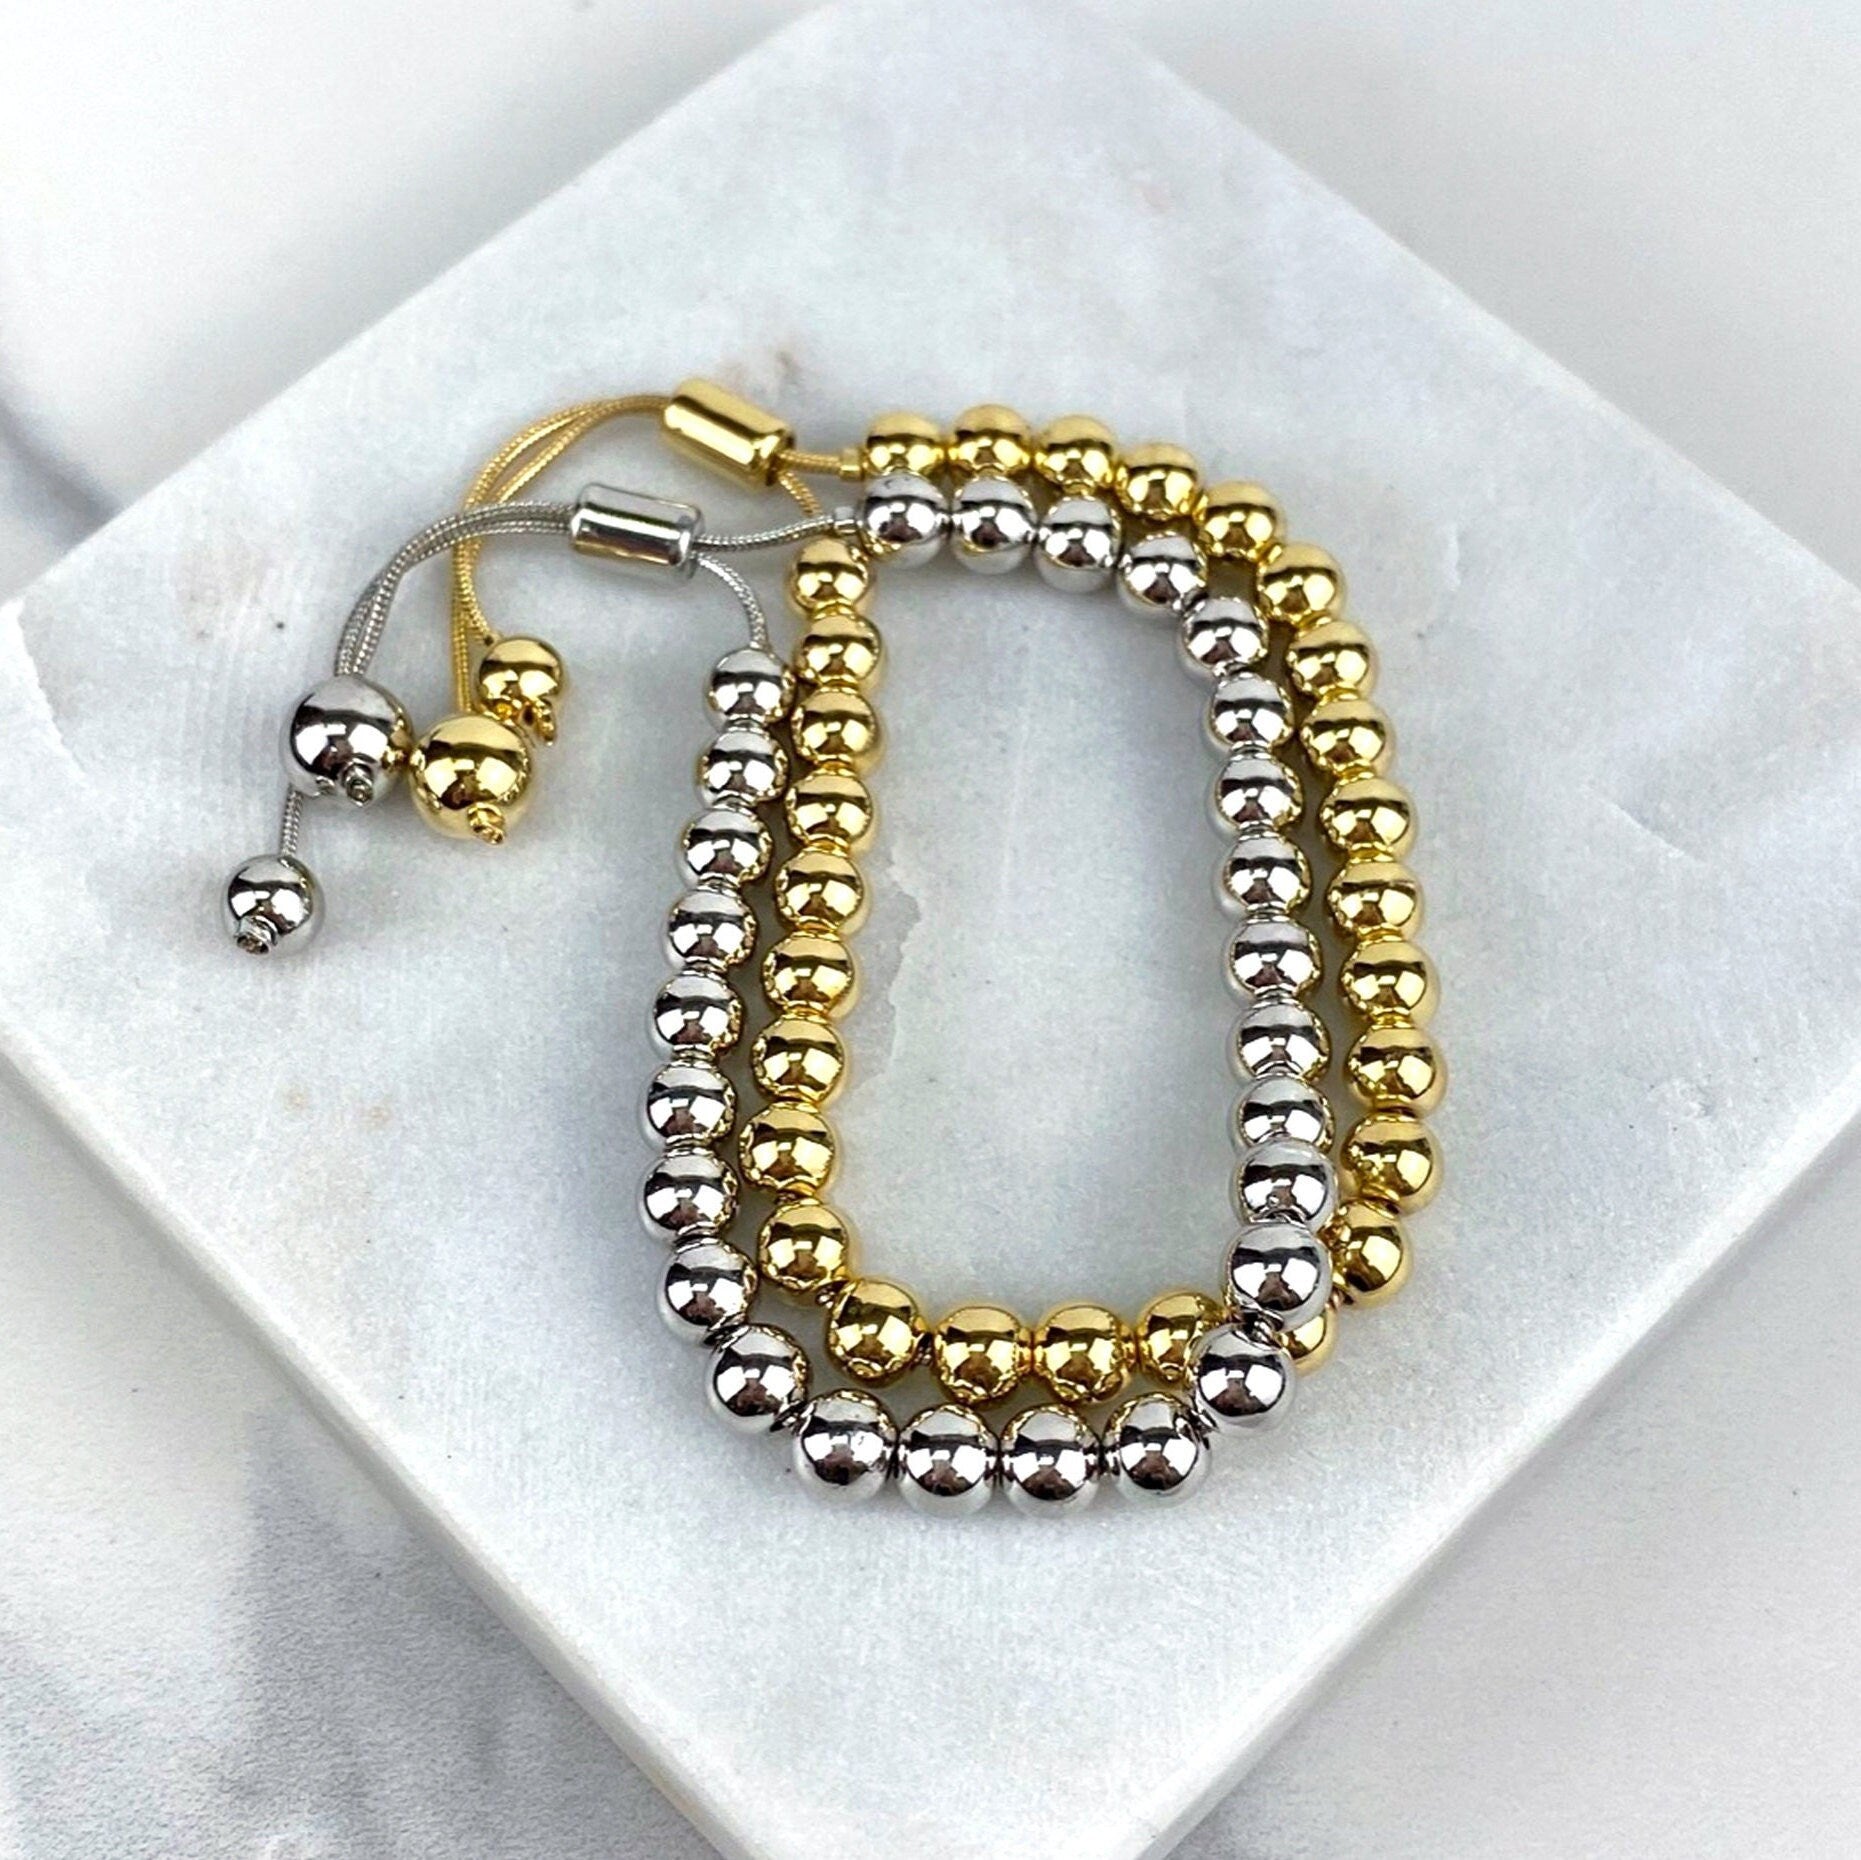 18k Gold Filled 6mm Medium Beaded Bracelet Available in Gold or Silver Wholesale Jewelry Supplies